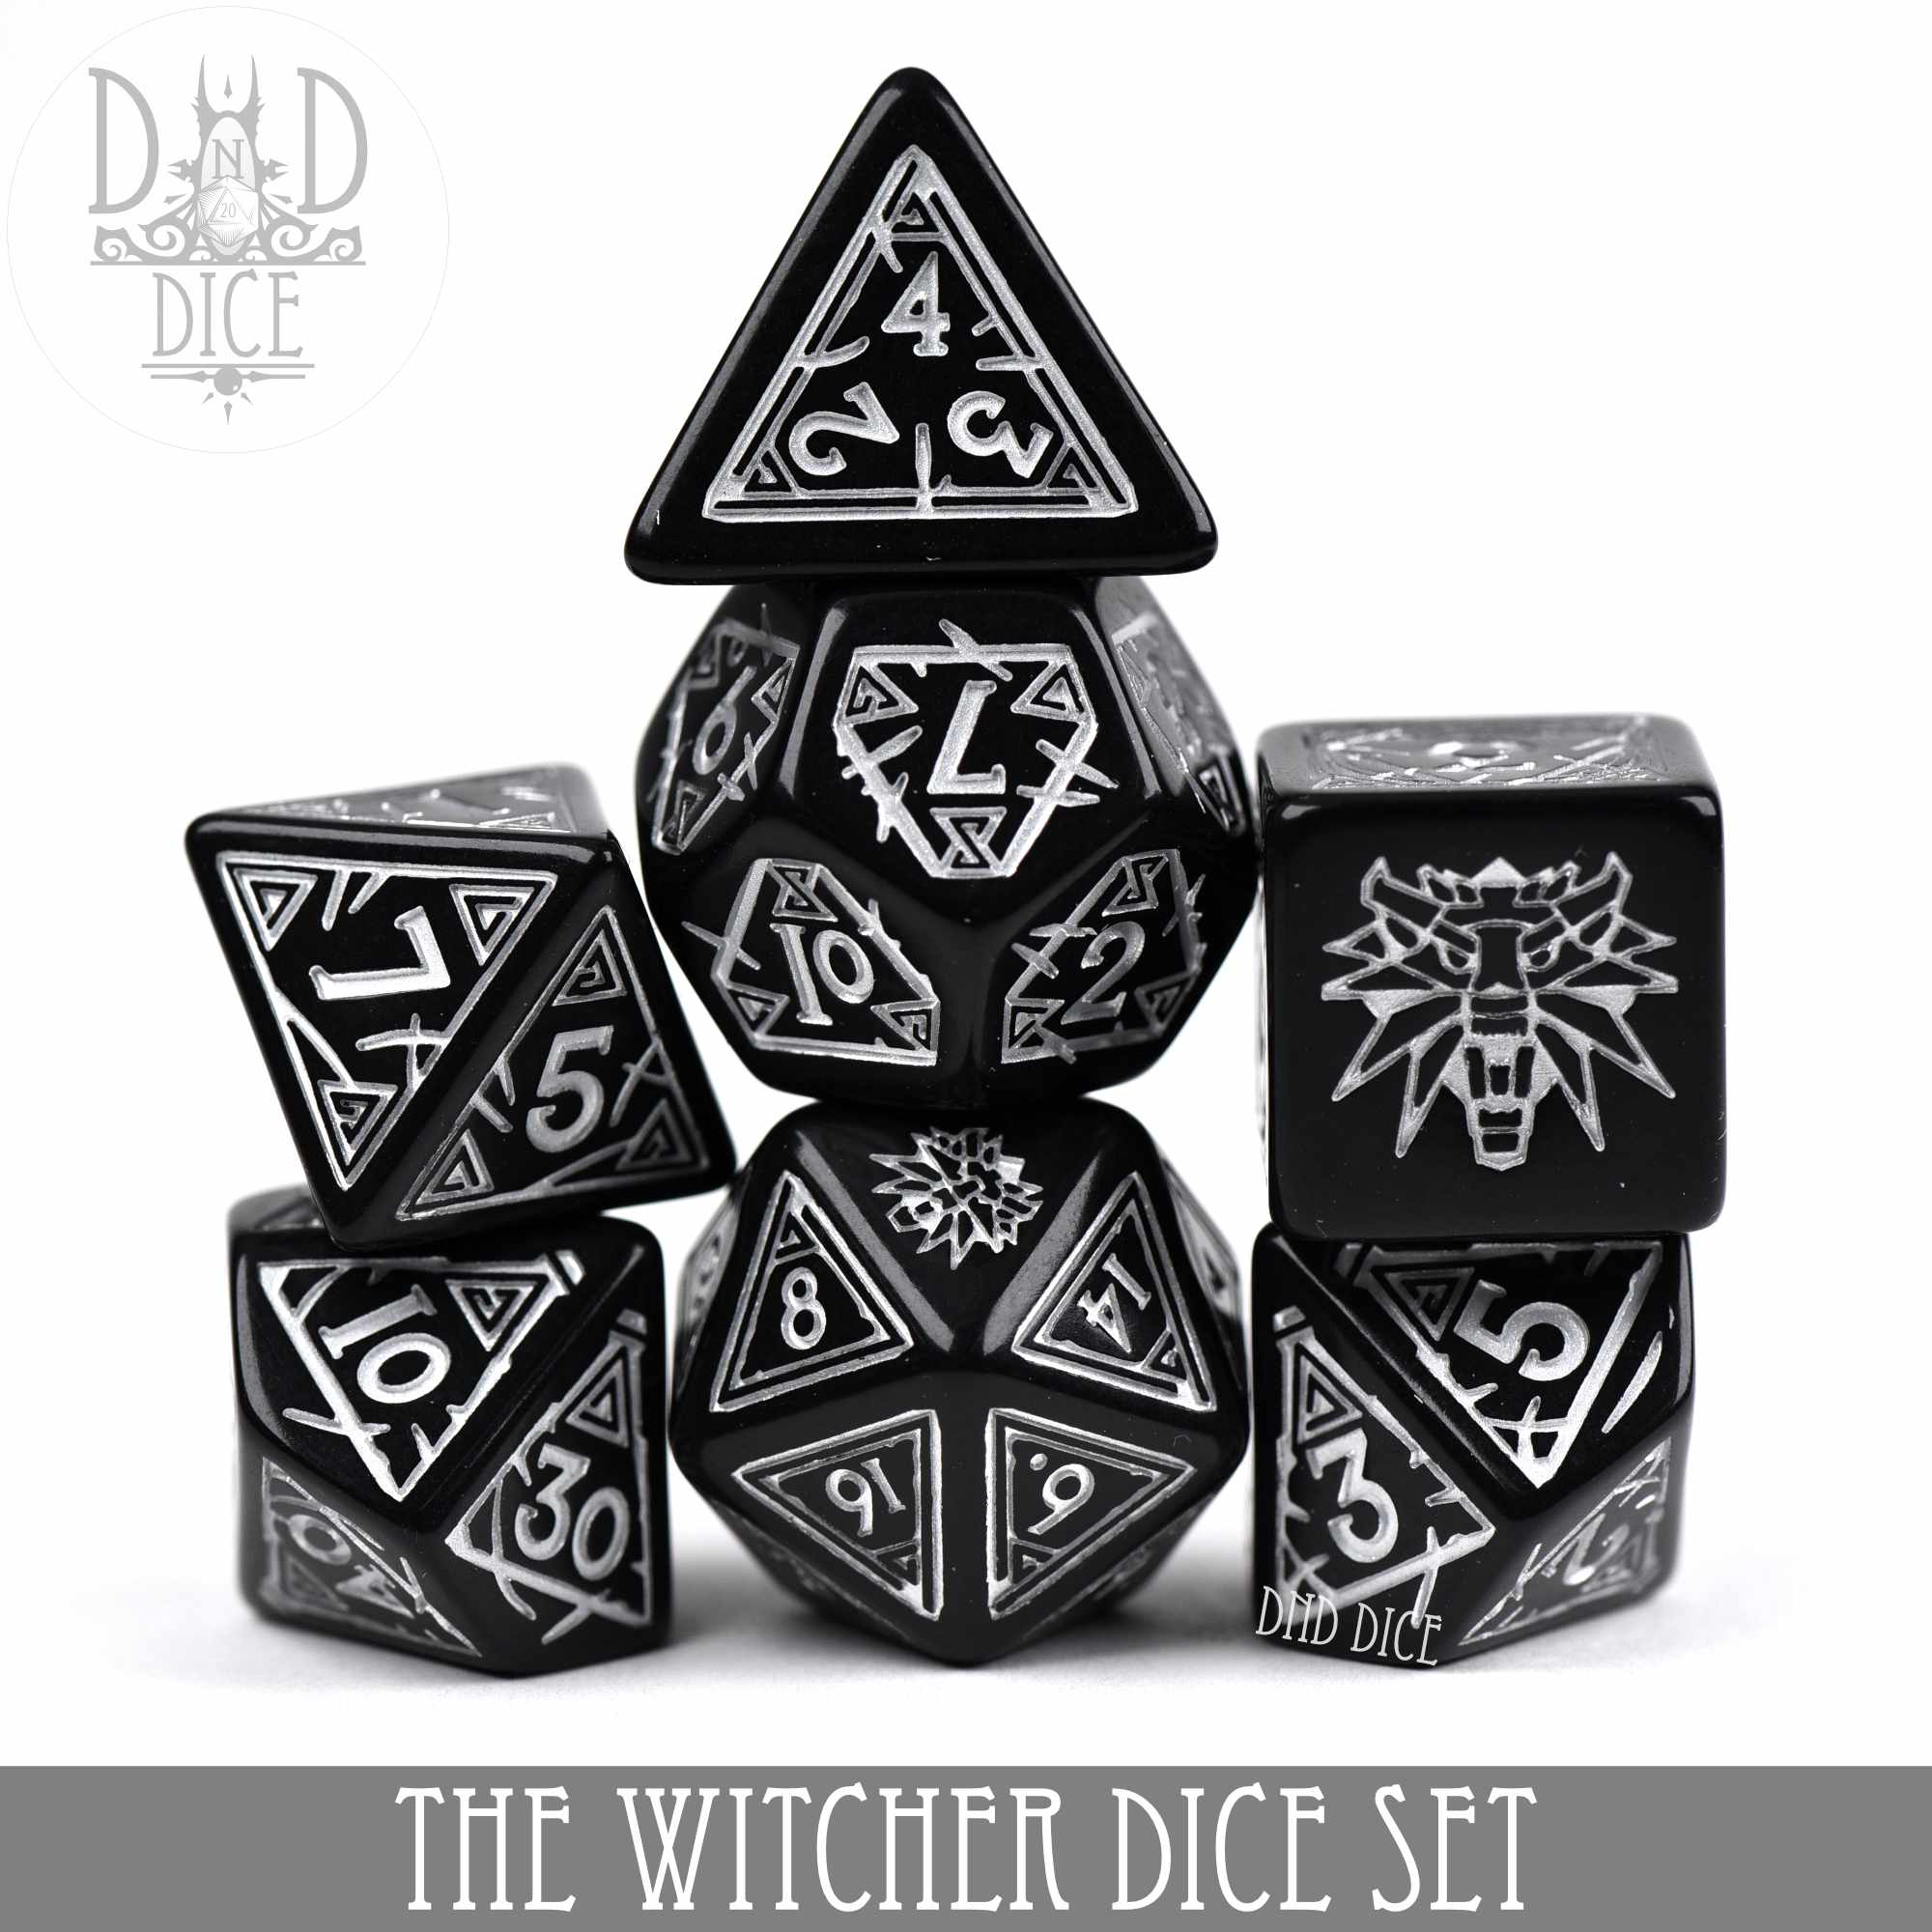 The Witcher Dice Set and Coin - Geralt